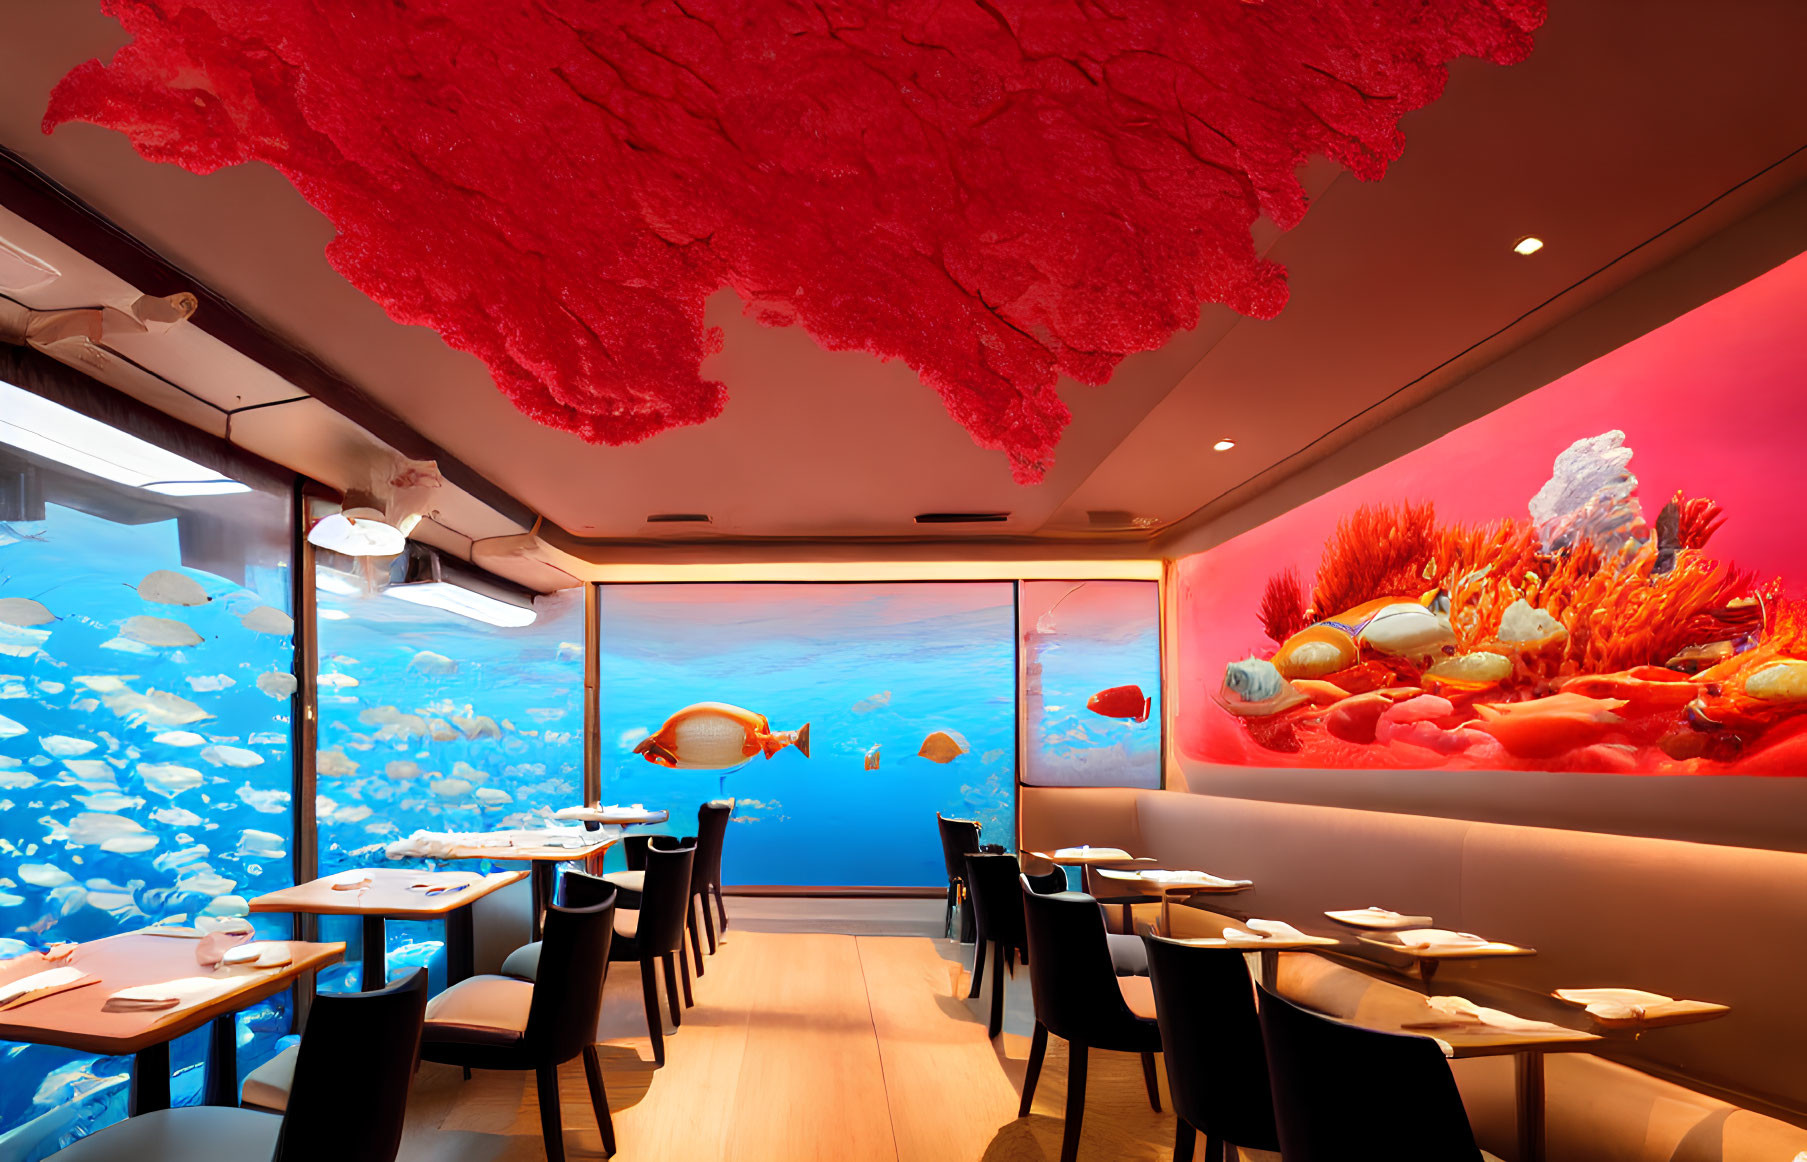 Colorful restaurant interior with aquarium wall, coral ceiling, warm lighting, and set tables